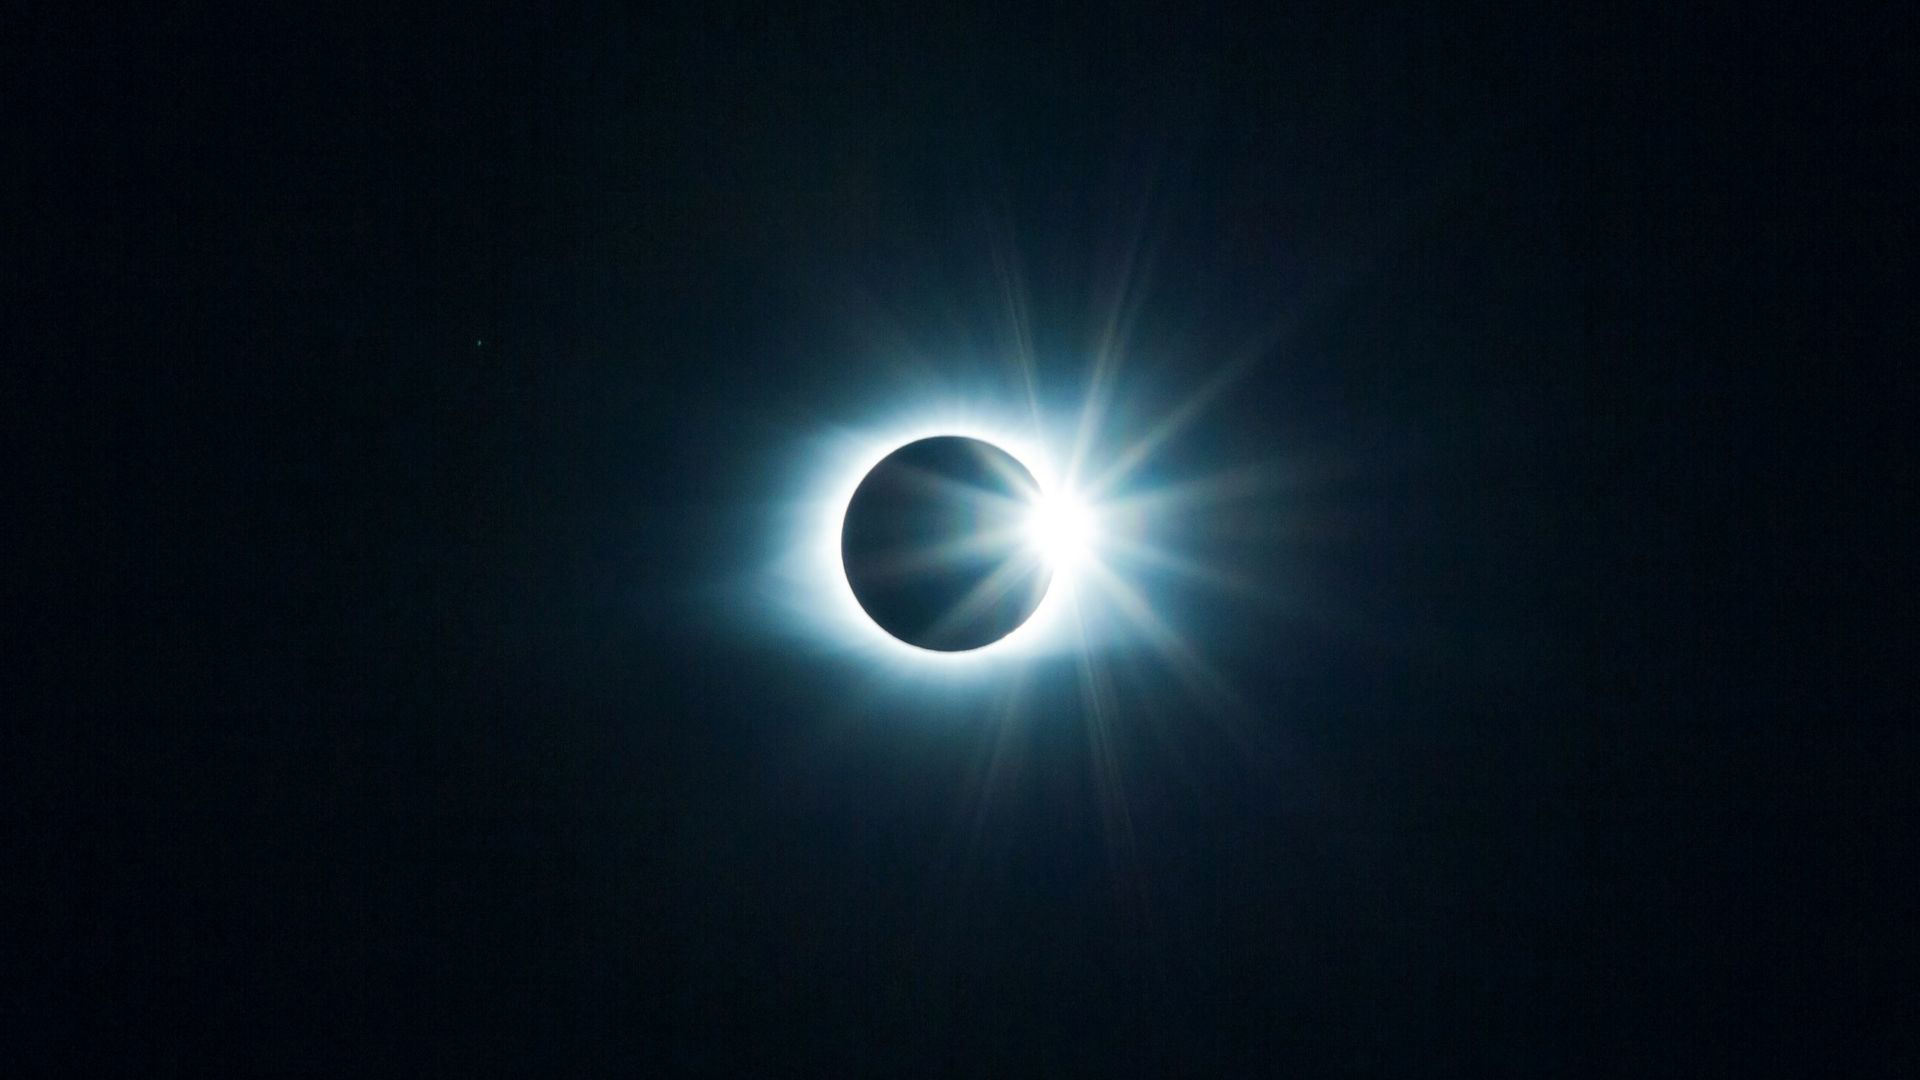 How I plan to capture the solar eclipse with my iPhone — take the best